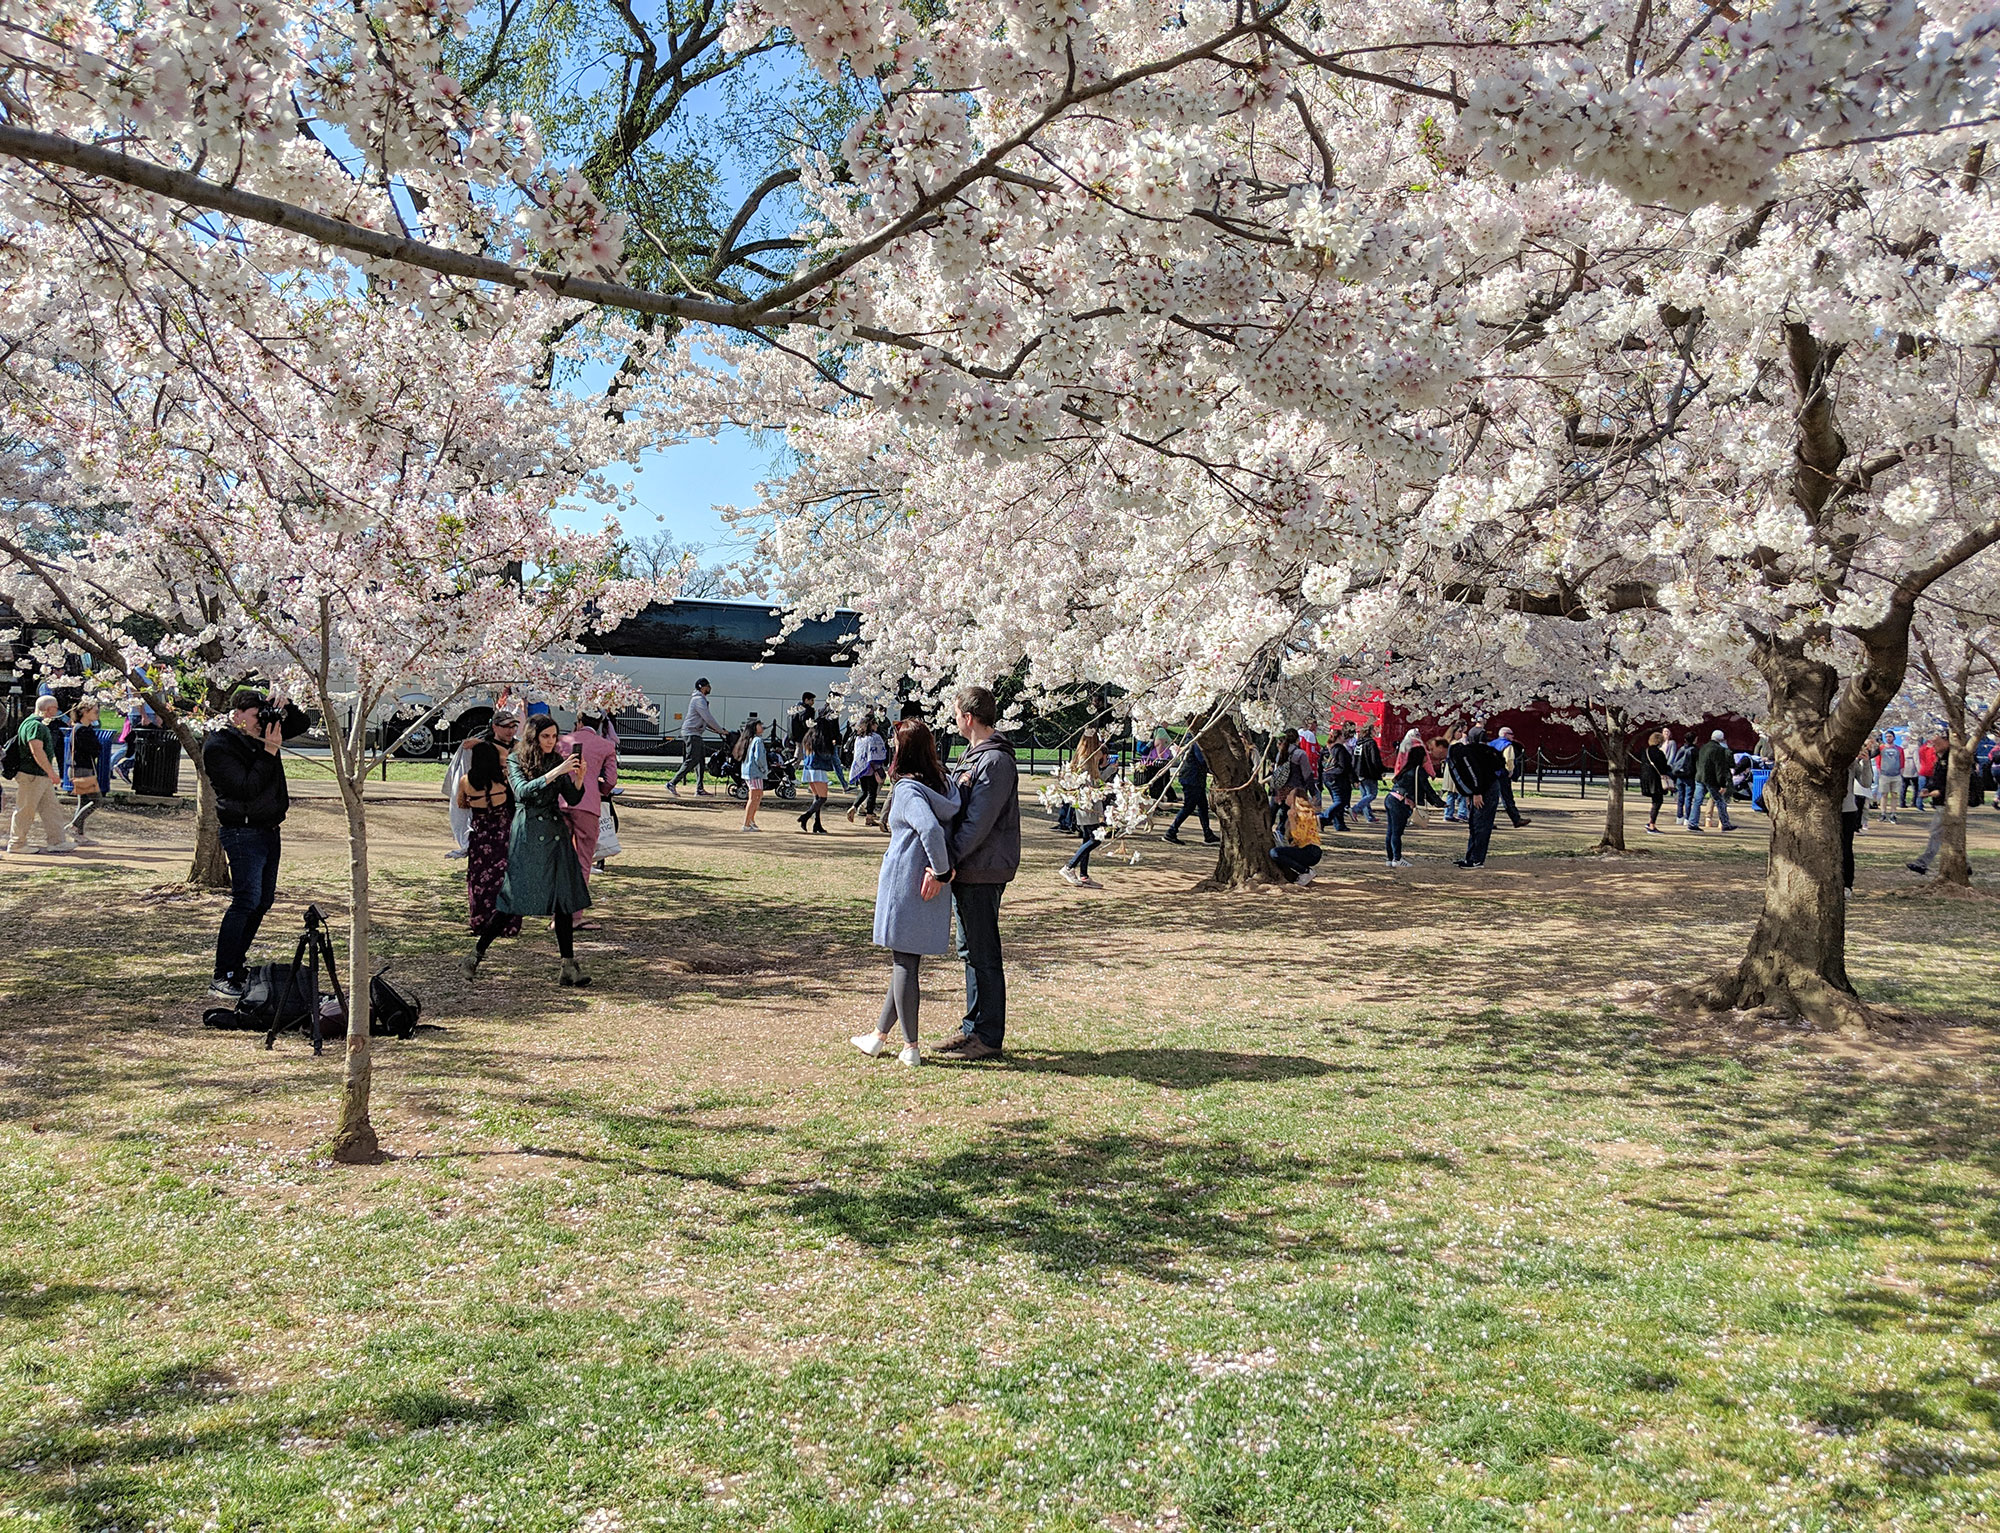 Tourists taking pictures of the Washington D.C. cherry blossoms in the National Mall.